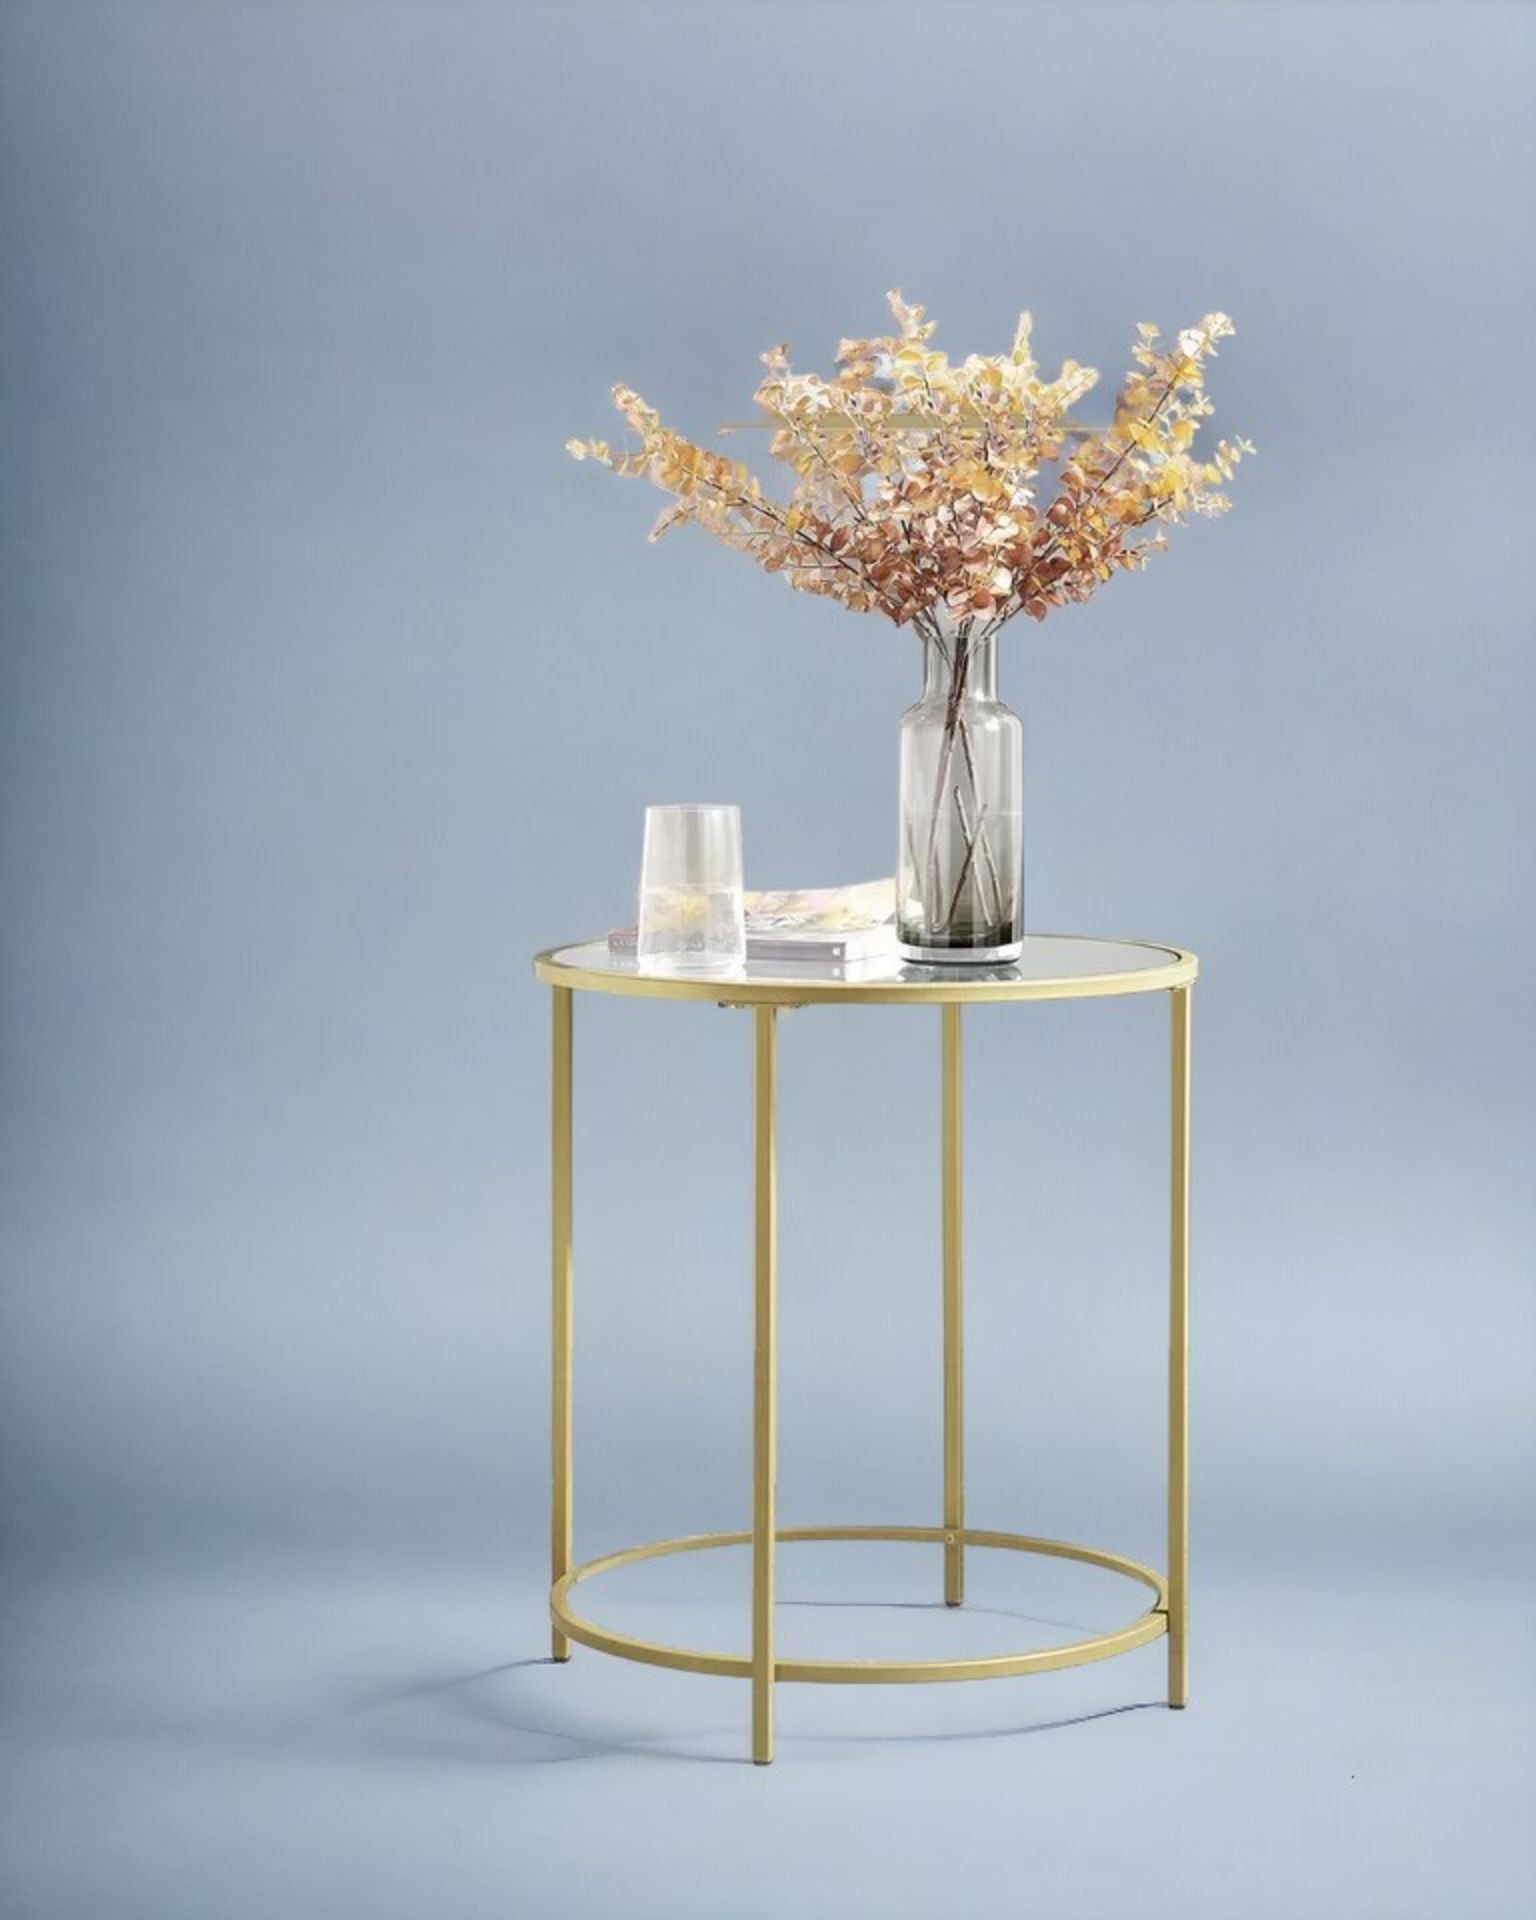 FREE DELIVERY - BRAND NEW VASAGLE END TABLE SIDE TABLE TEMPERED GLASS WITH GOLDEN METAL FRAME